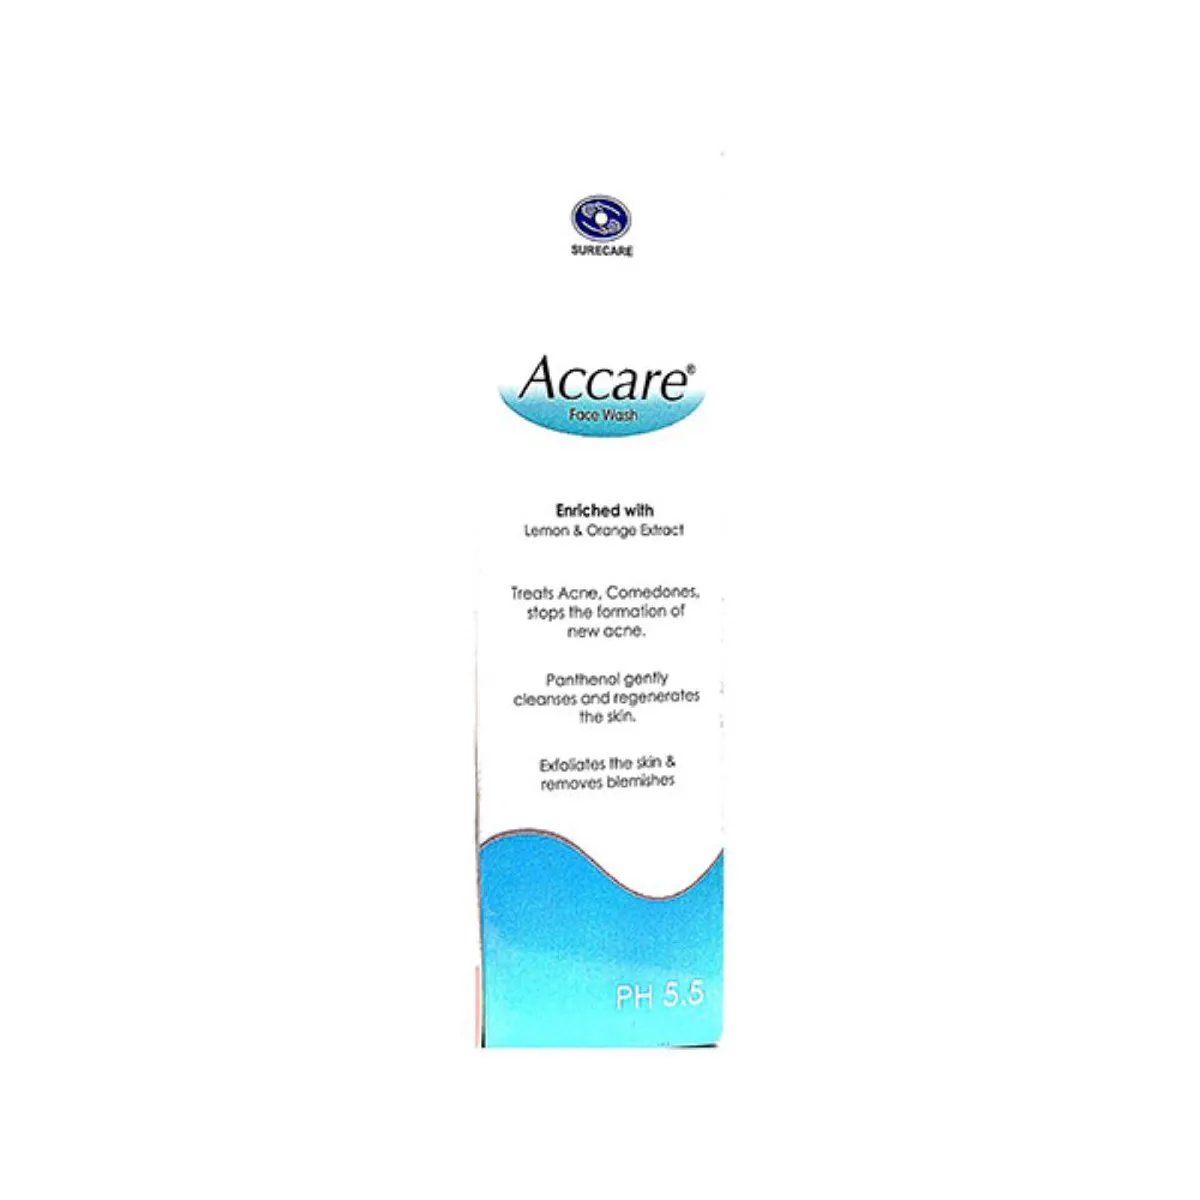 Accare Face Wash with Lemon & Orange Extract | For Acne & Blemishes